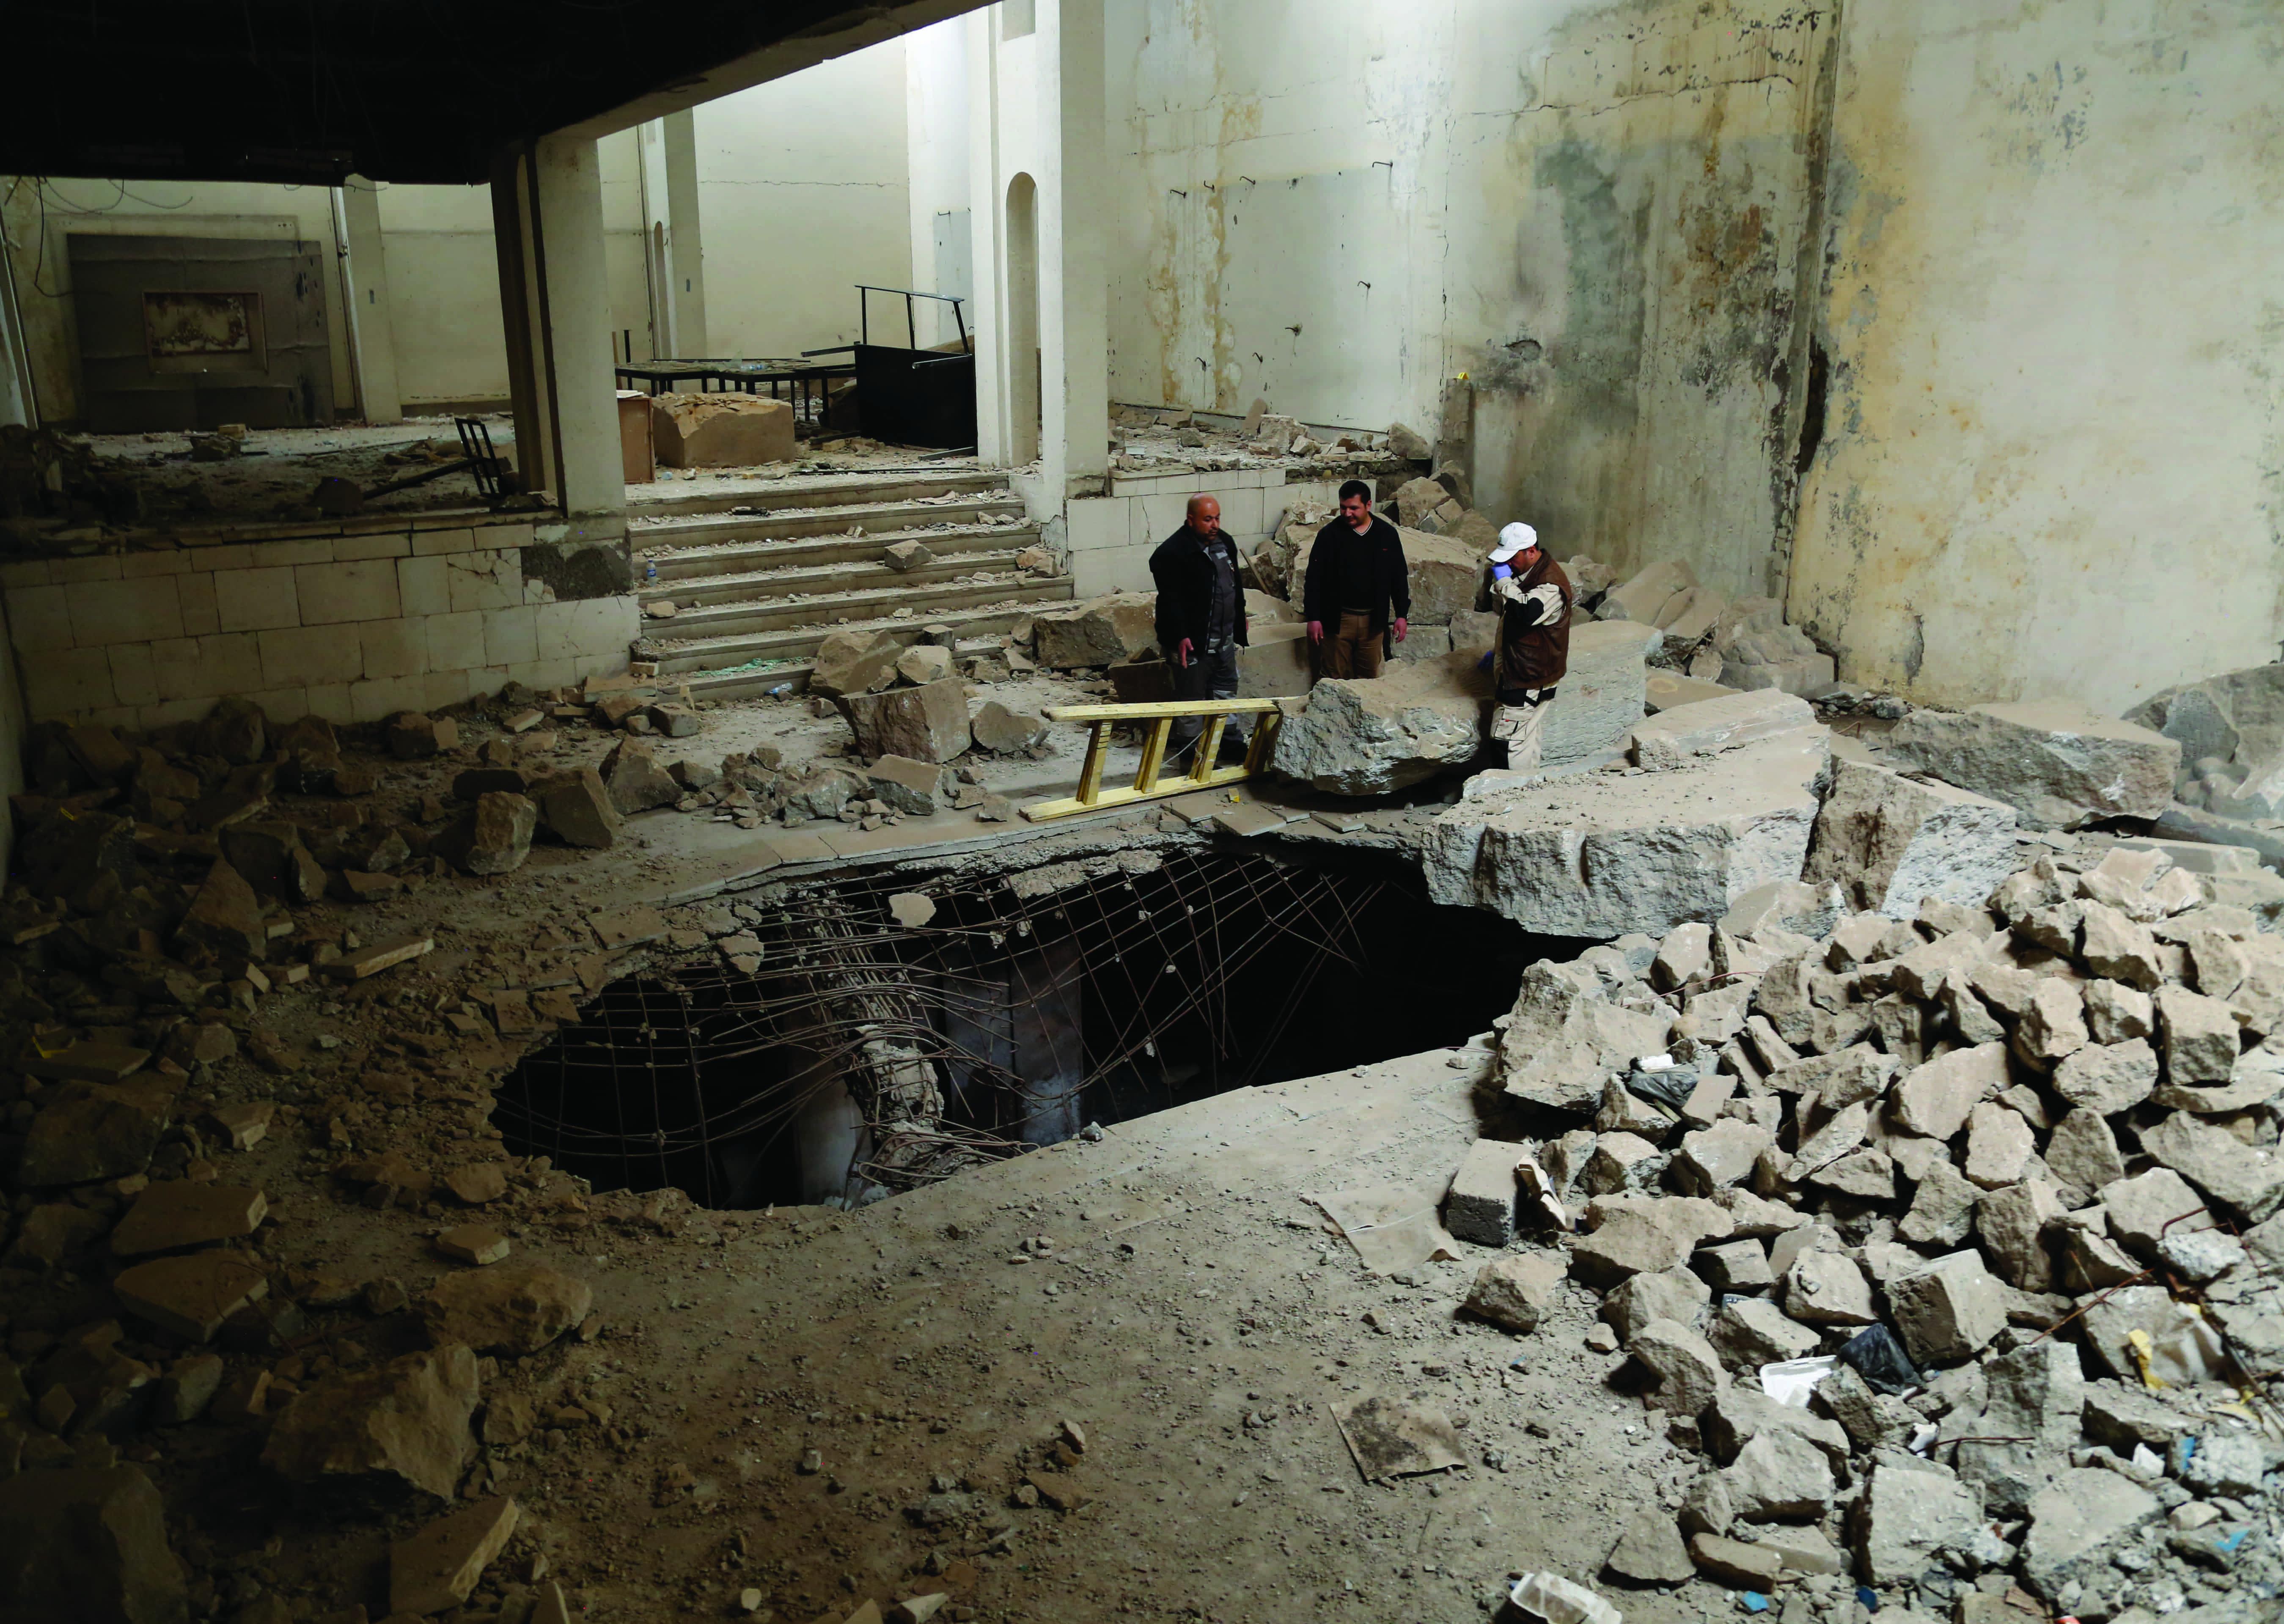 Hole in the center of a room surrounded by debris.